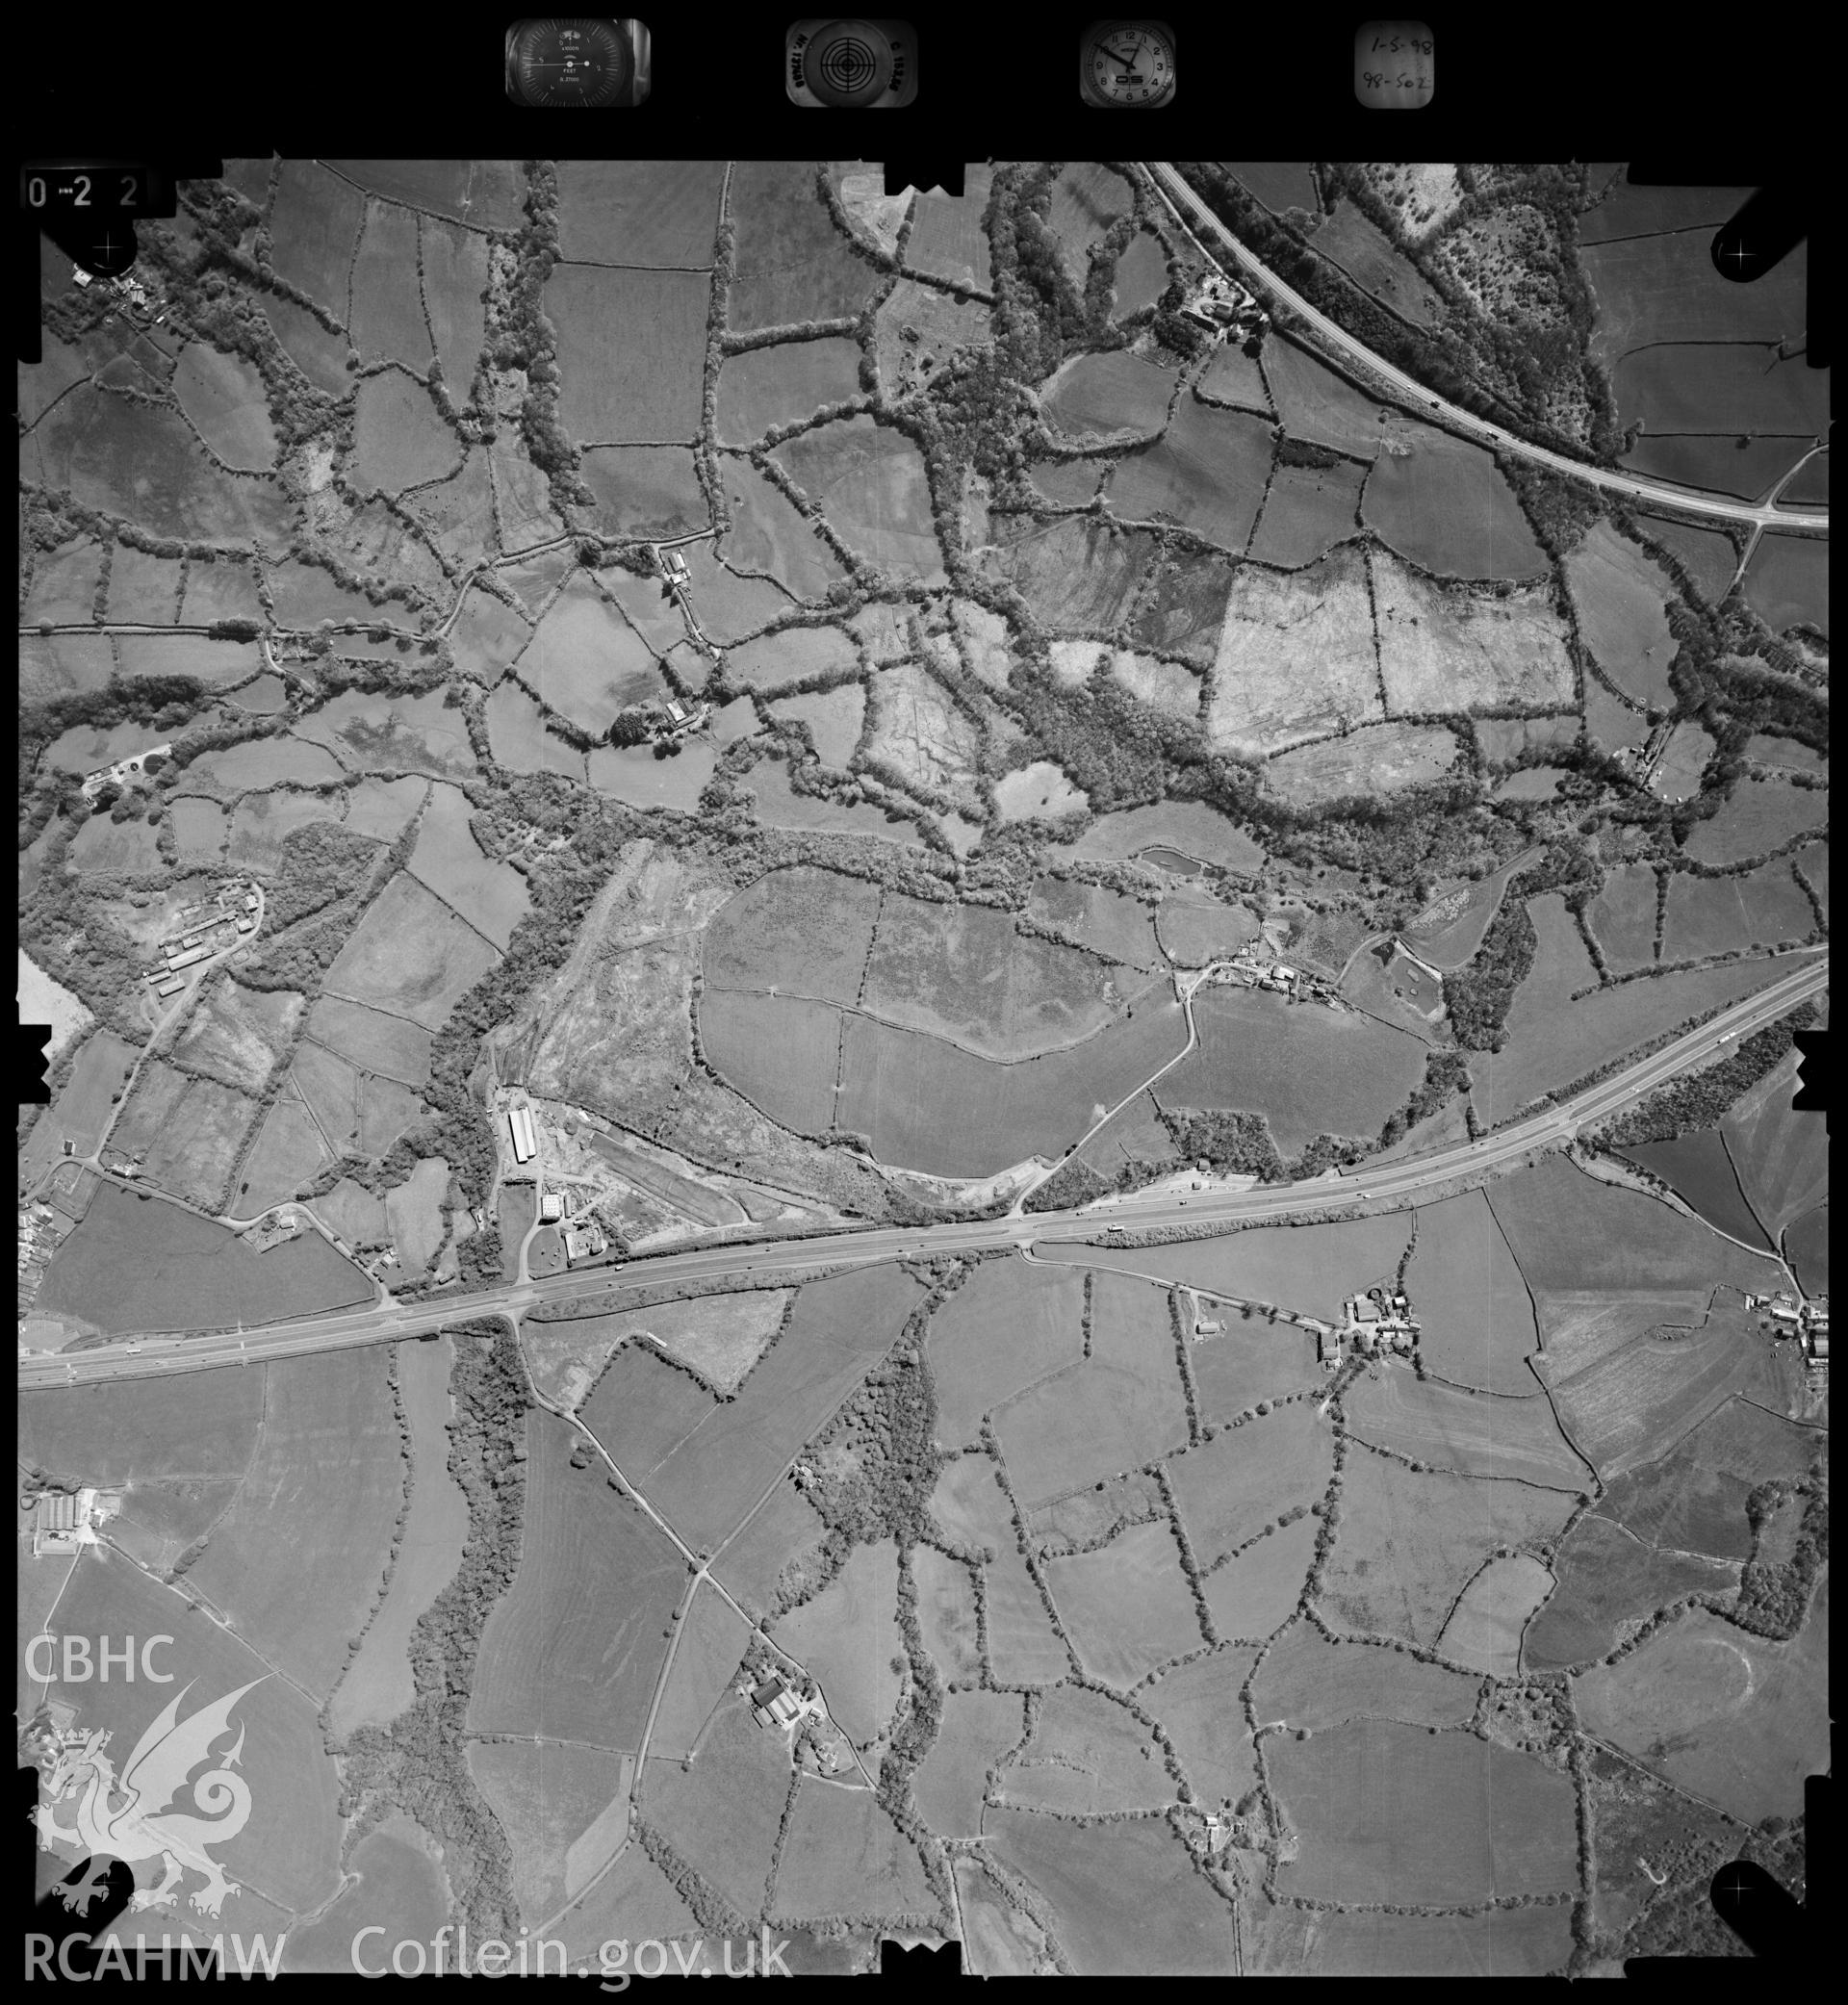 Digitized copy of an aerial photograph showing Crosshands area, taken by Ordnance Survey, 1998.